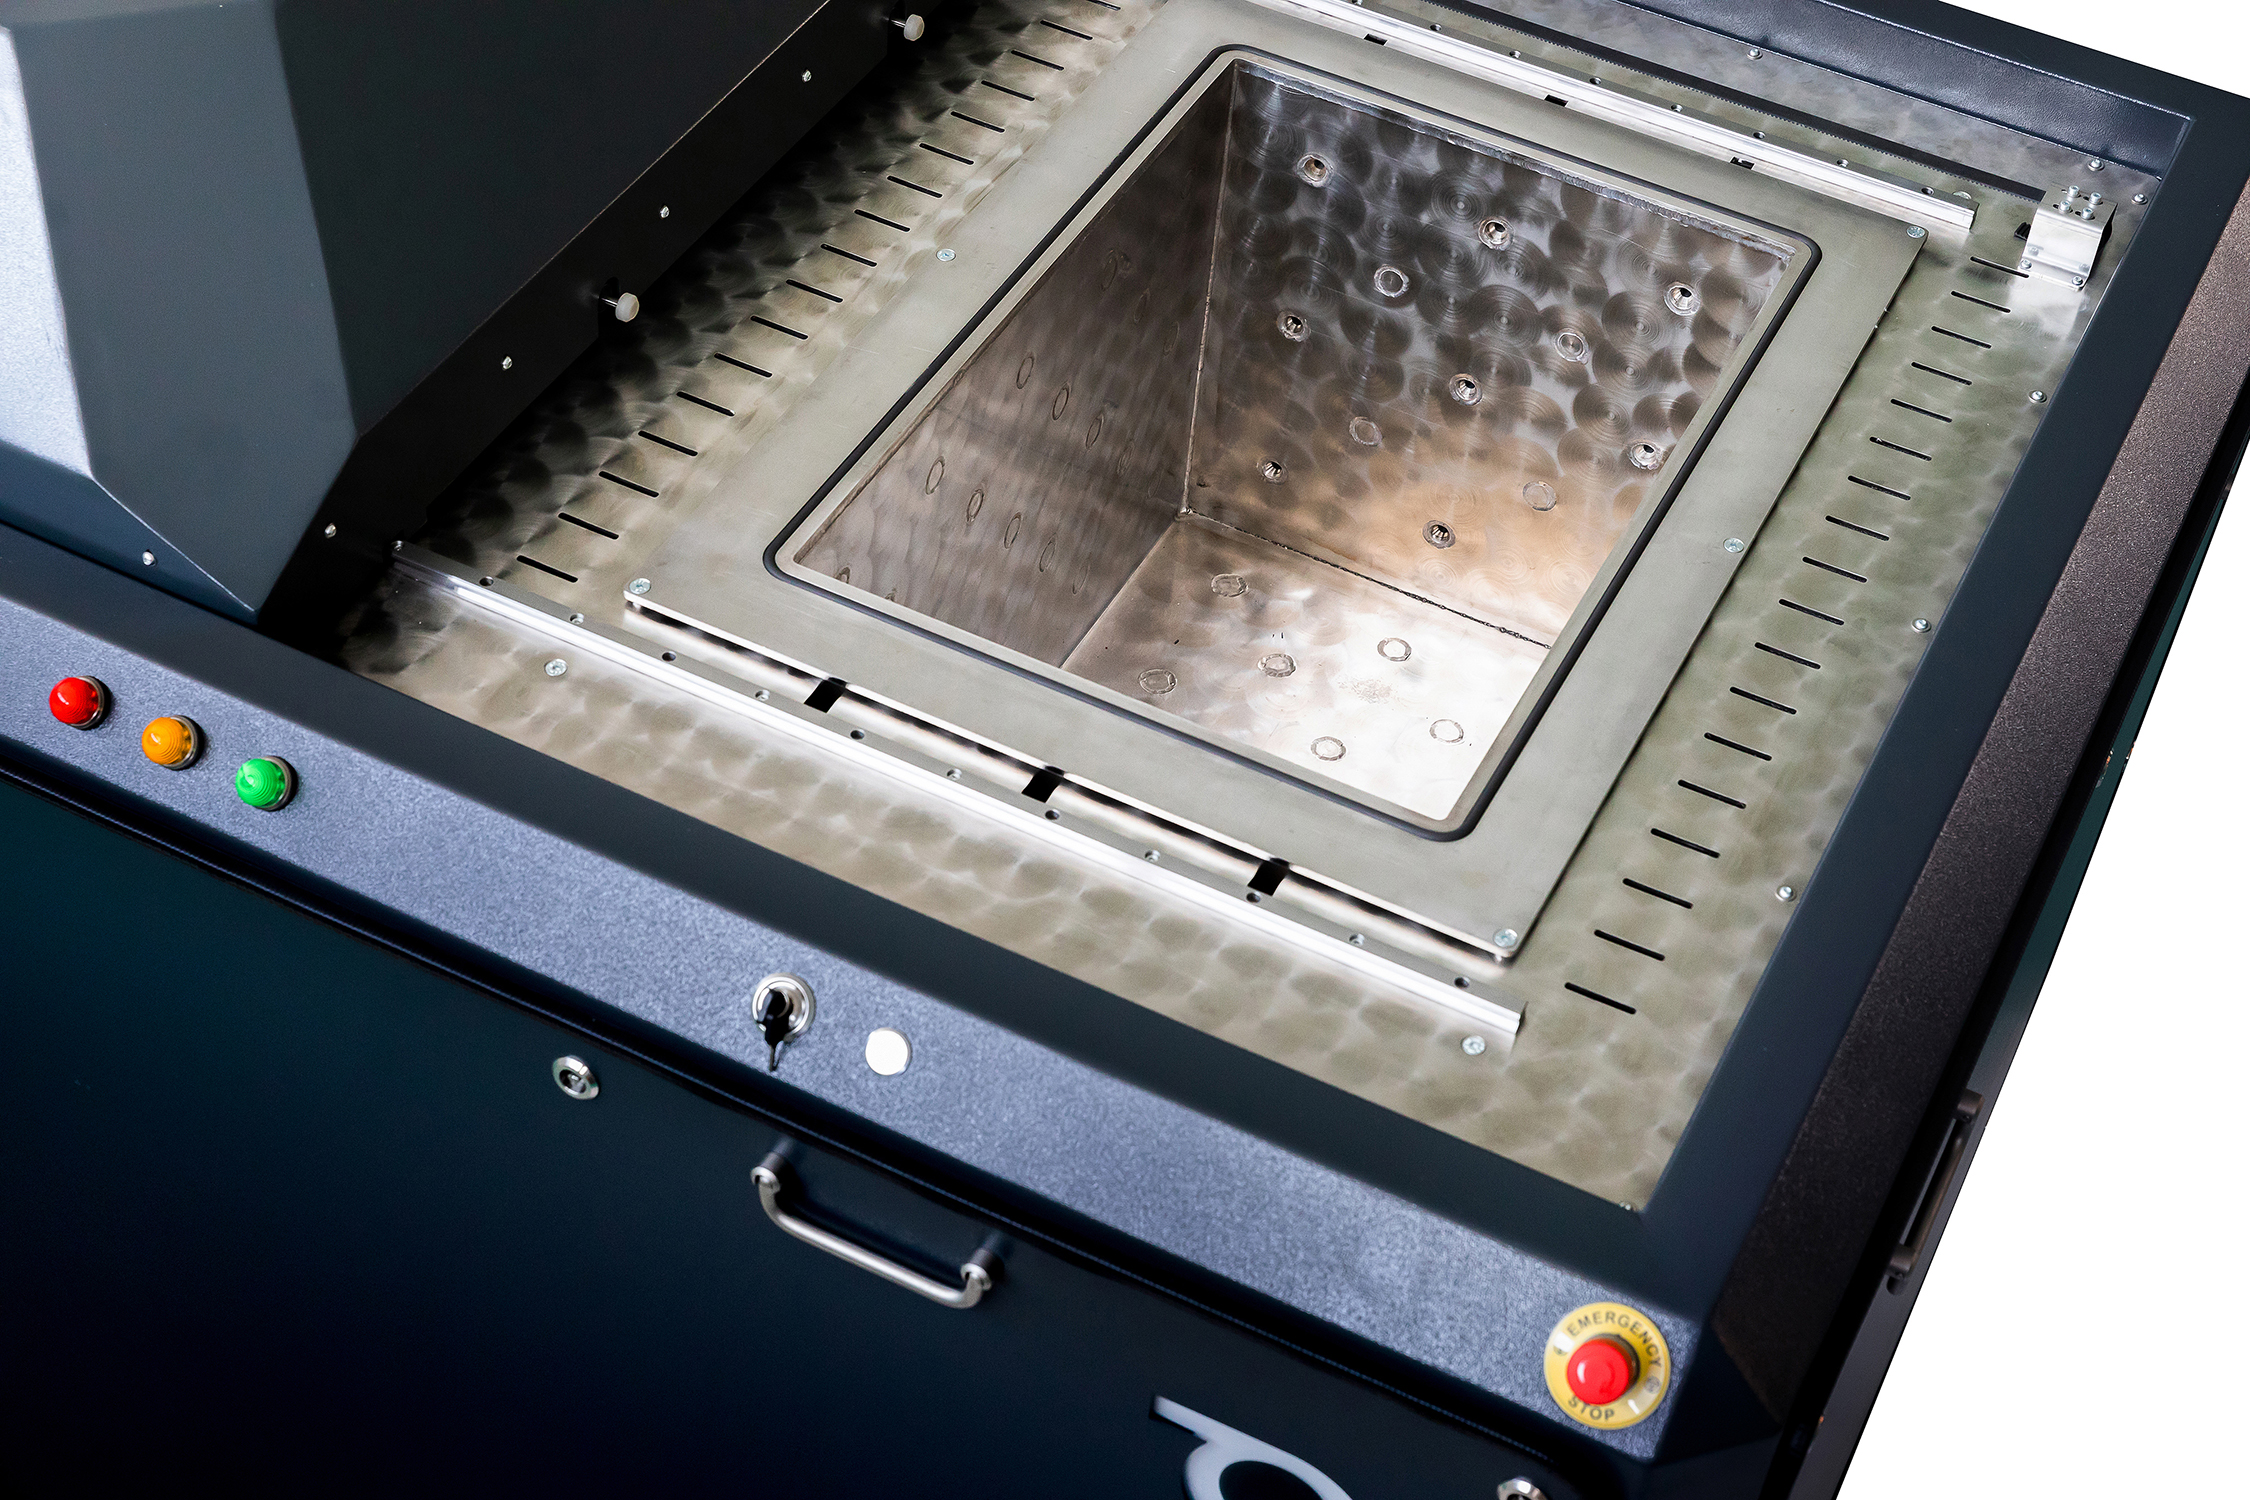 AMT’s PostPro 3D machine fully automates surface finishing of 3D printed parts, skyrocketing productivity from two parts finished every hour up to hundreds of parts per hour. [Source: AMT]